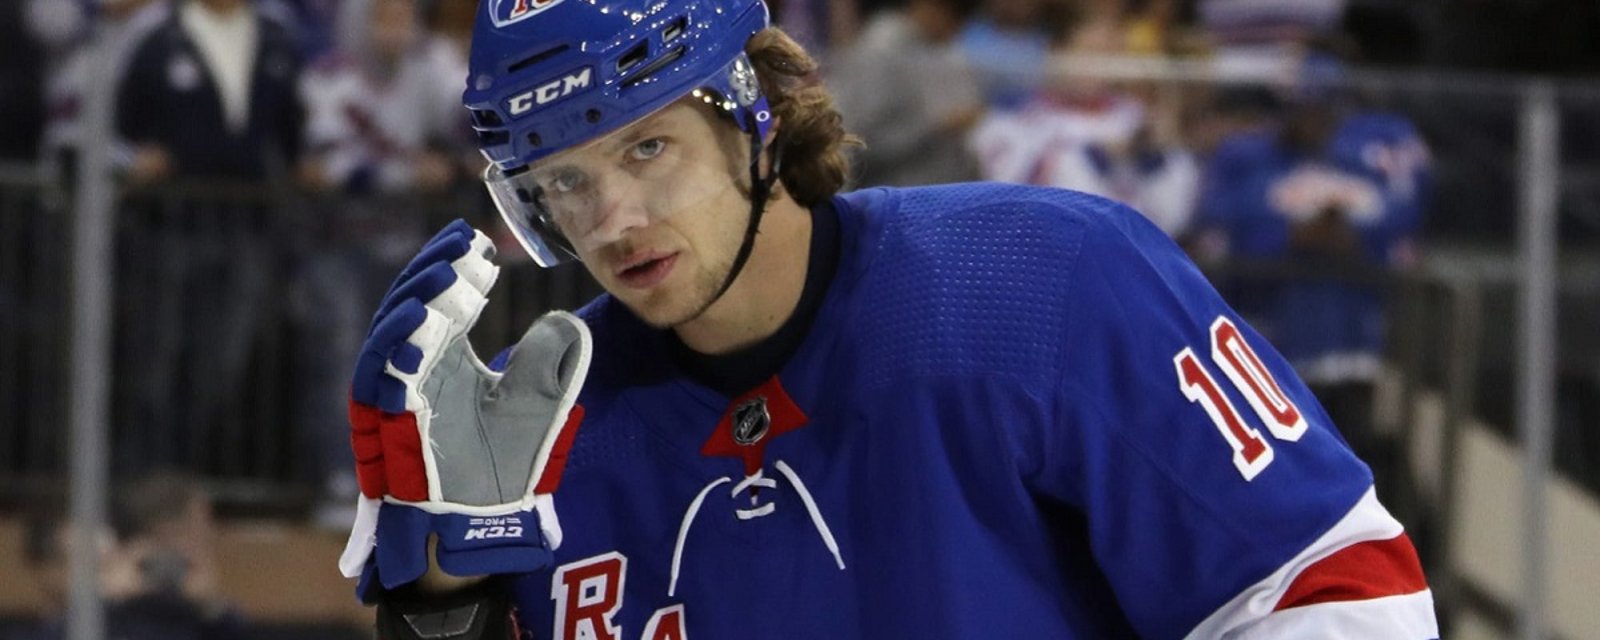 Rangers, Panarin, and more respond to today's accusations.